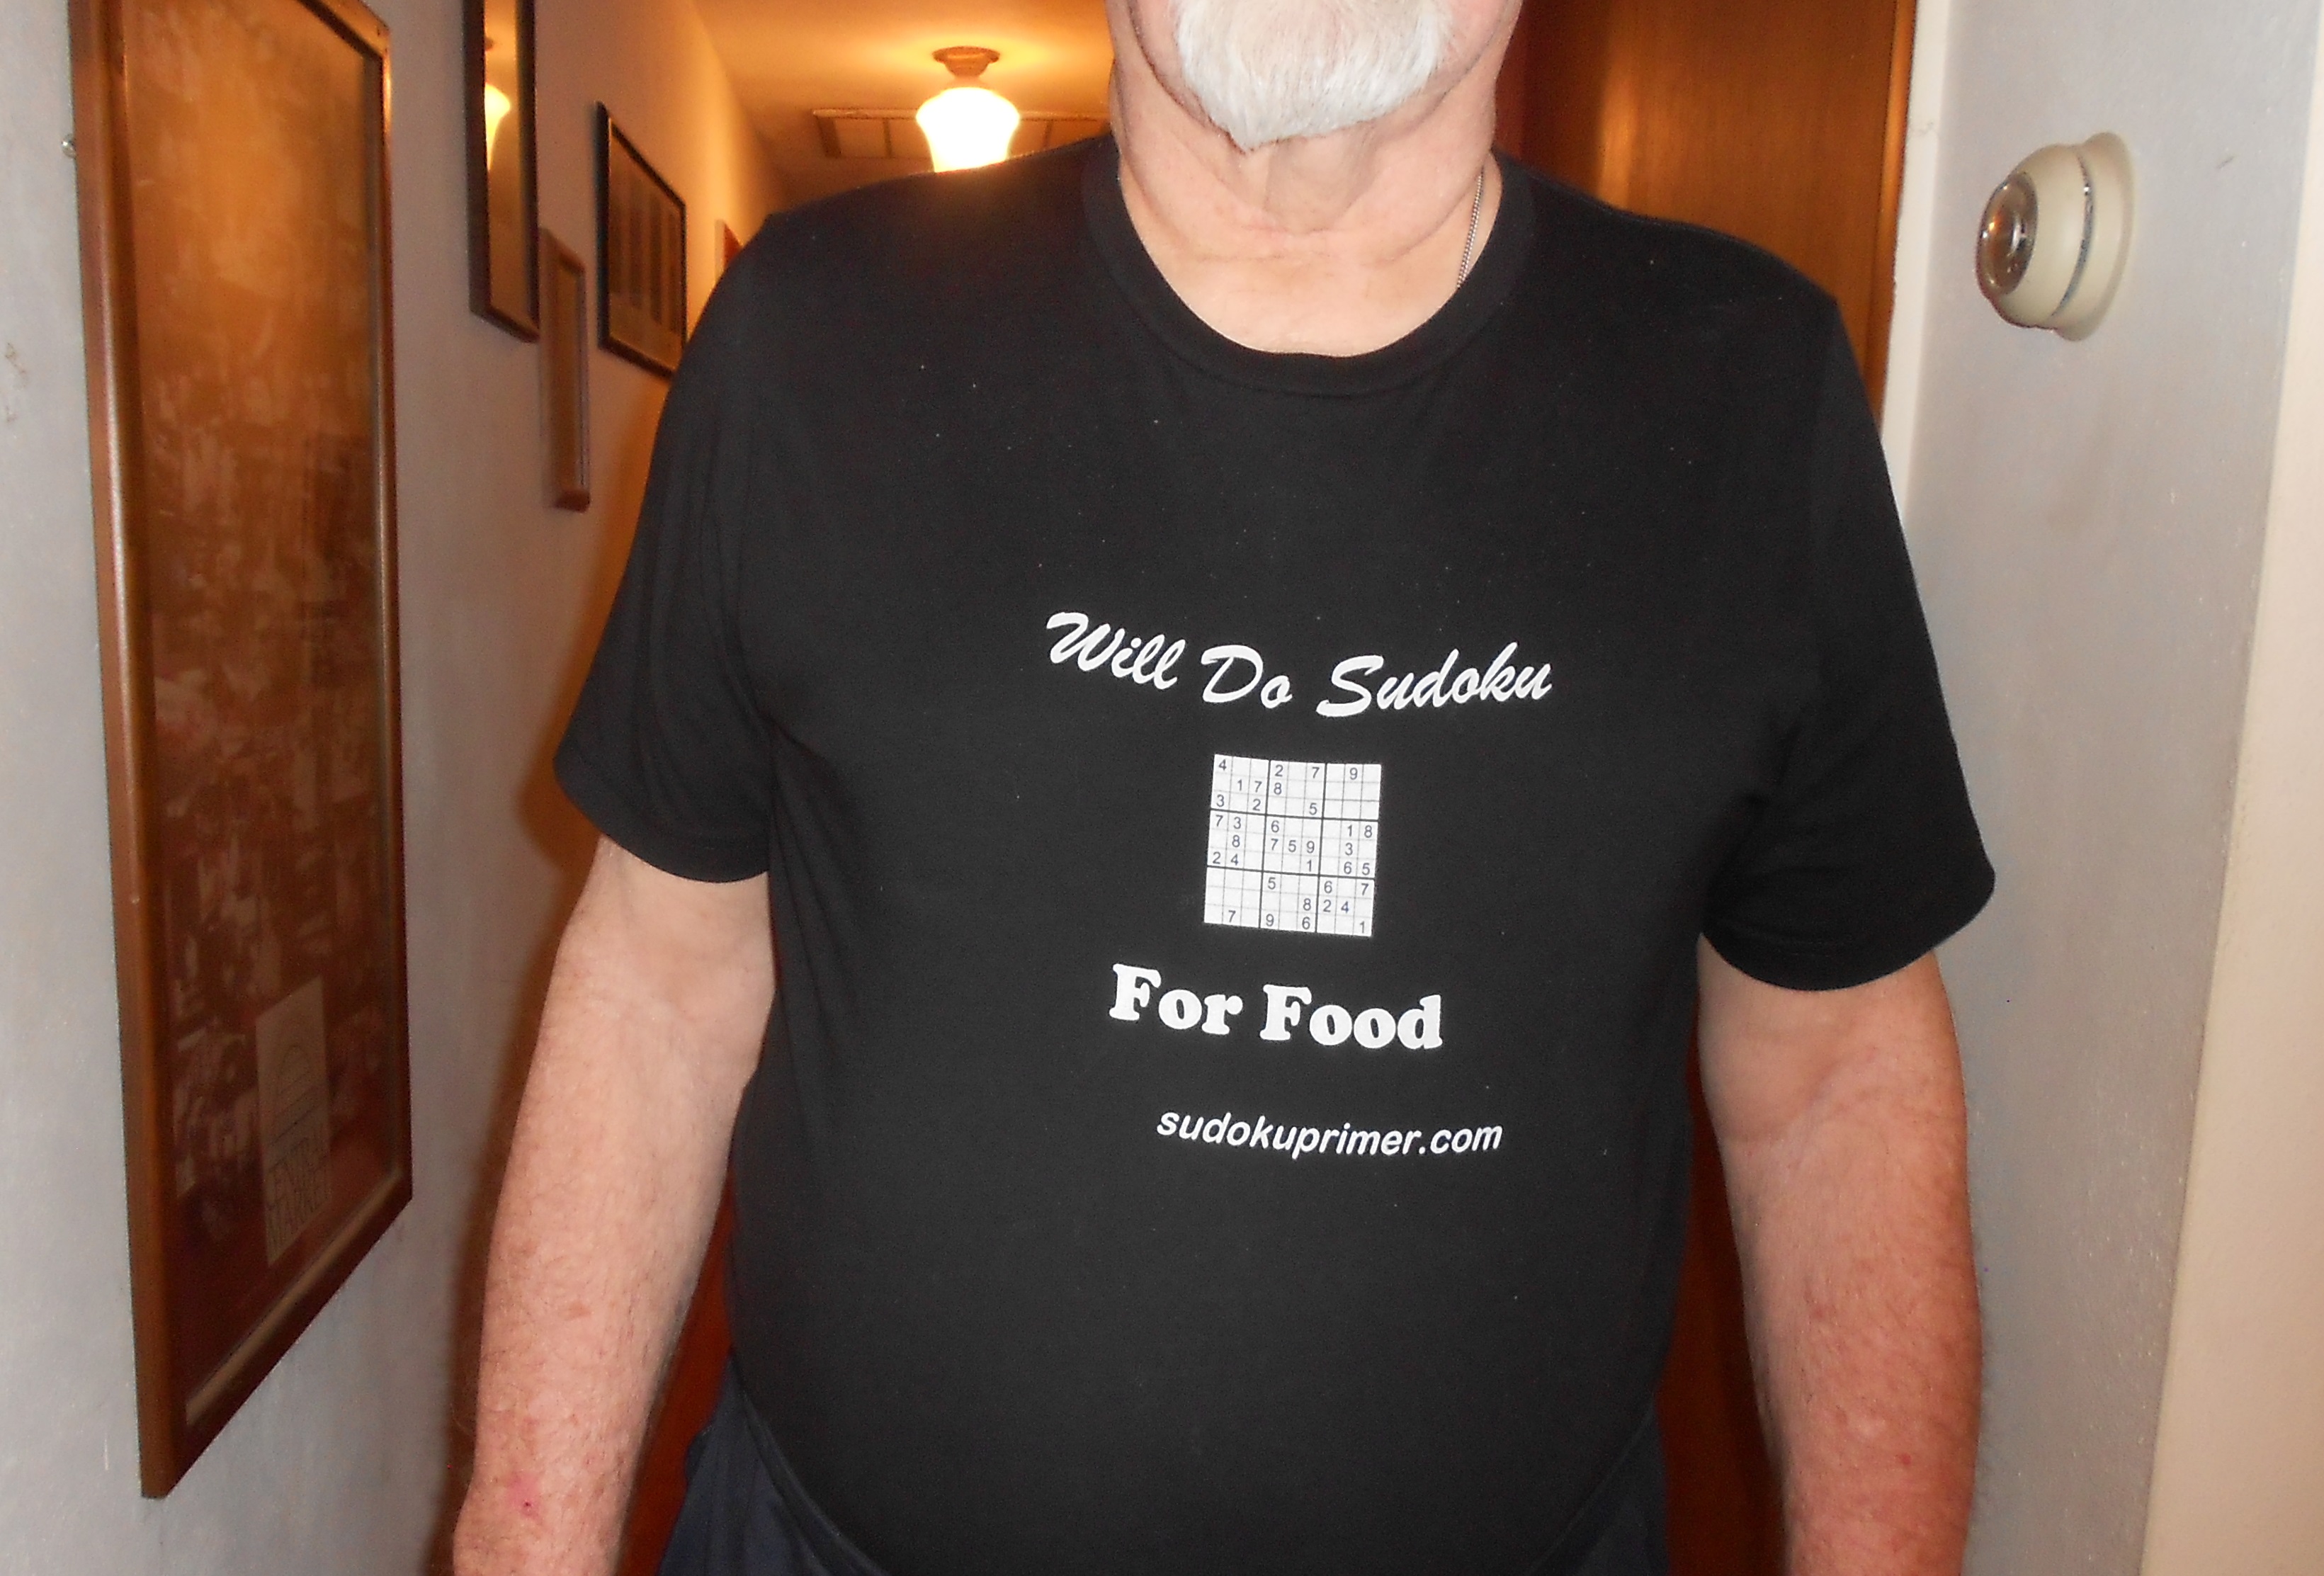 Picture of sudoku t-shirt contest winner in the shirt he won